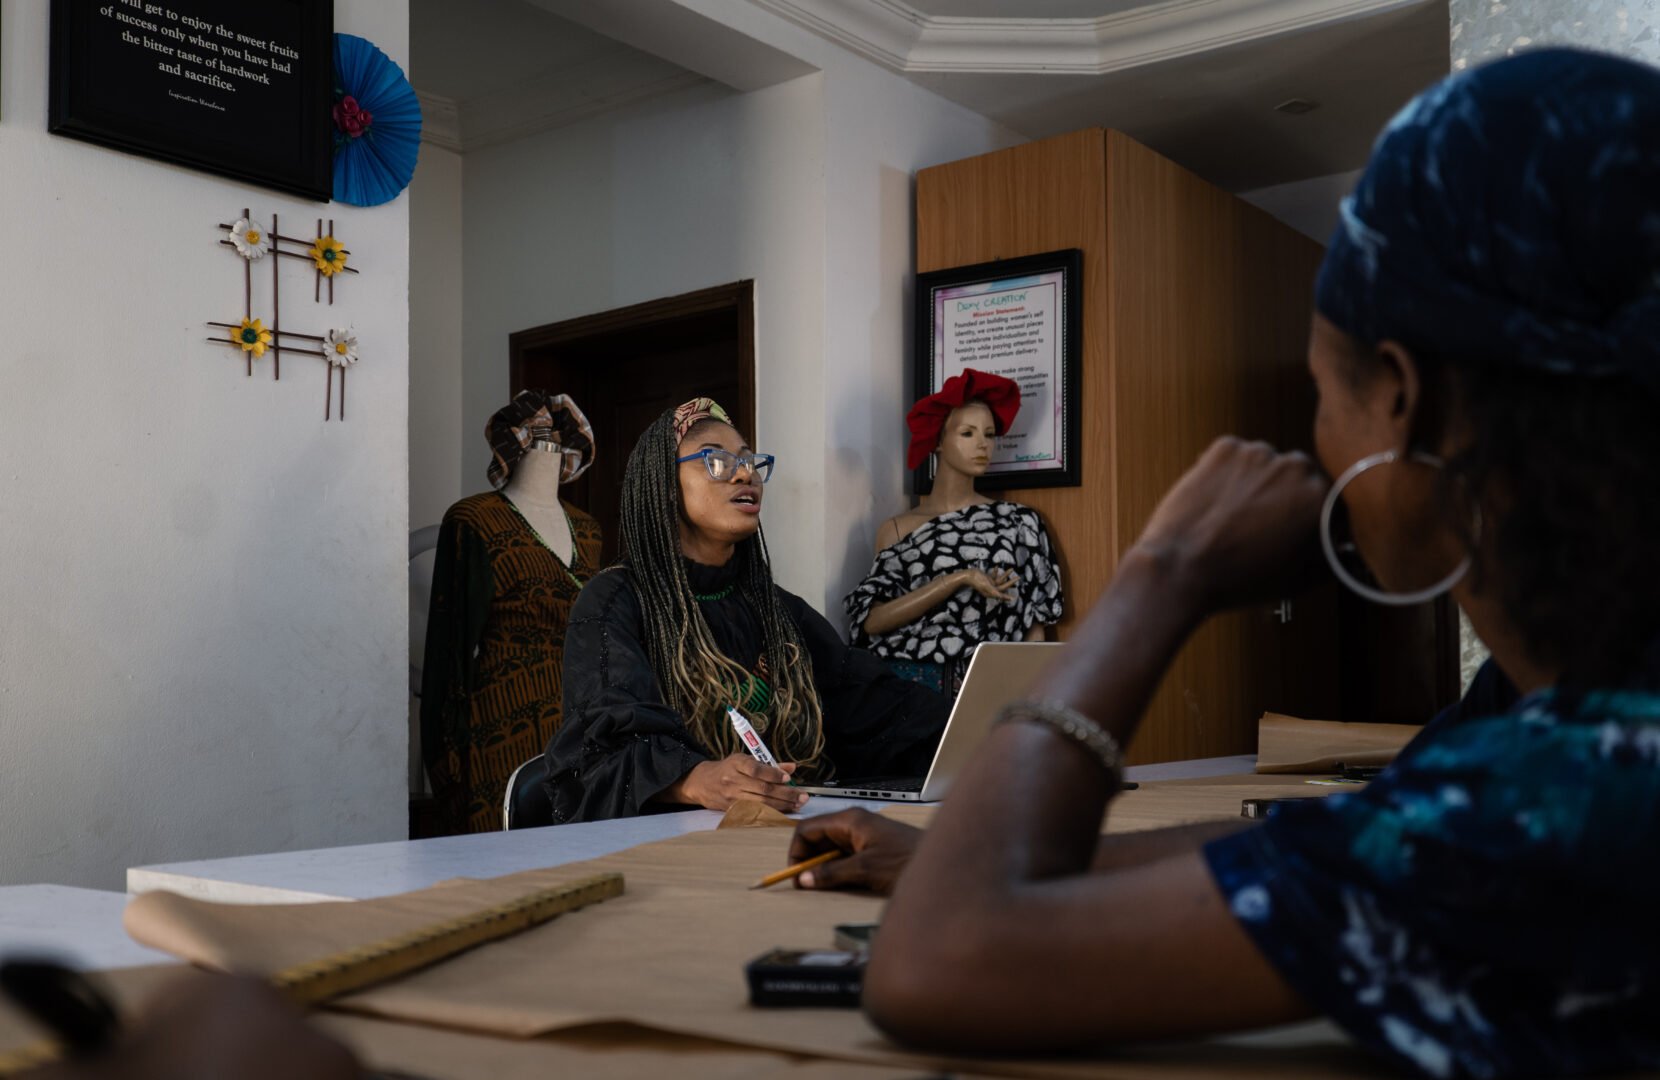 Adaeze Onu, a Nigerian woman with braids, glasses and a colourful headband, sits with her staff around a meeting table in her office. There are mannequins in garments standing behind her and she is holding a marker pen and speaking.